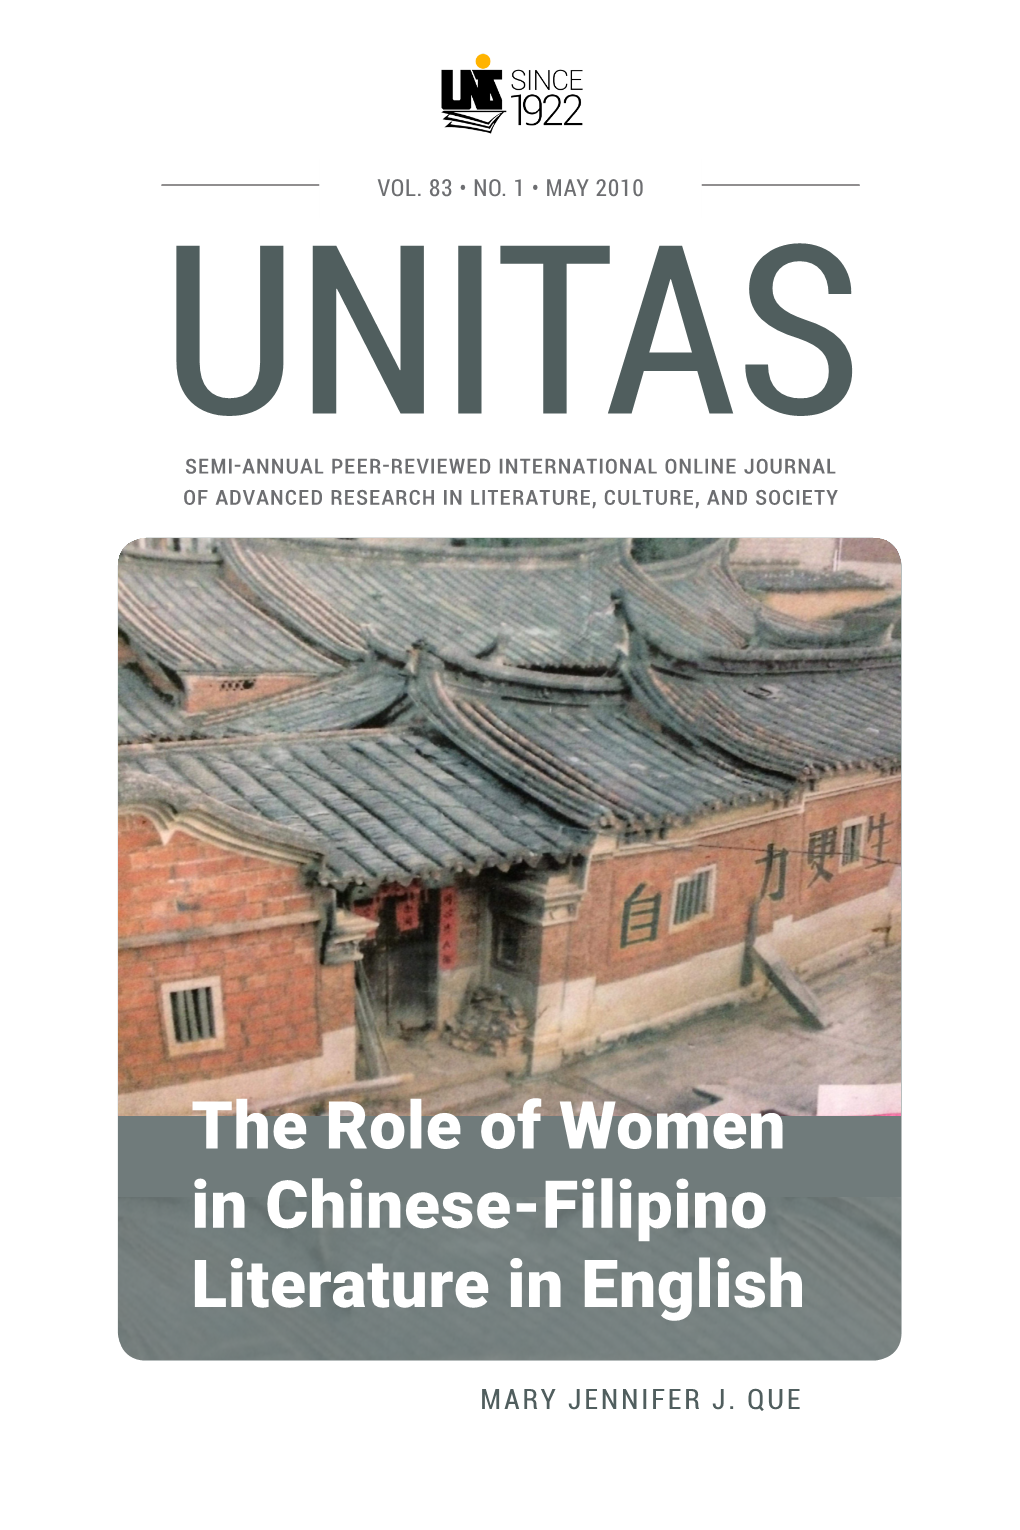 The Role of Women in Chinese-Filipino Literature in English